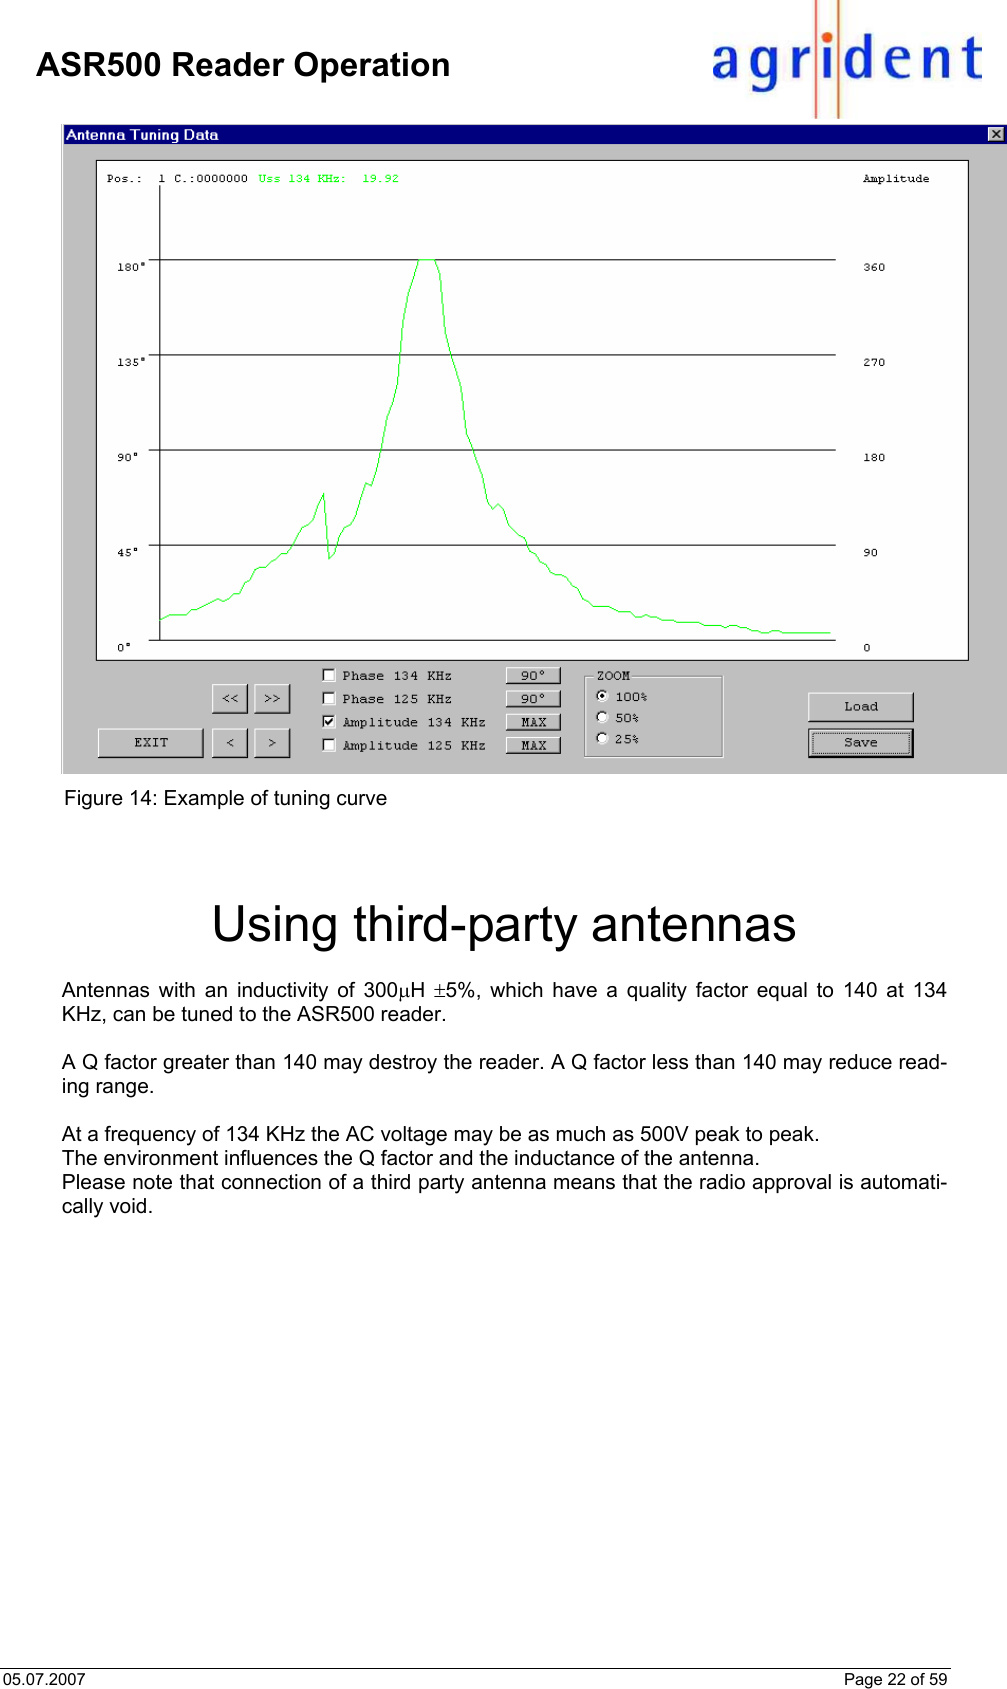 05.07.2007    Page 22 of 59     ASR500 Reader Operation  Figure 14: Example of tuning curve    Using third-party antennas  Antennas with an inductivity of 300µH  ±5%, which have a quality factor equal to 140 at 134 KHz, can be tuned to the ASR500 reader.  A Q factor greater than 140 may destroy the reader. A Q factor less than 140 may reduce read-ing range.  At a frequency of 134 KHz the AC voltage may be as much as 500V peak to peak. The environment influences the Q factor and the inductance of the antenna.  Please note that connection of a third party antenna means that the radio approval is automati-cally void. 